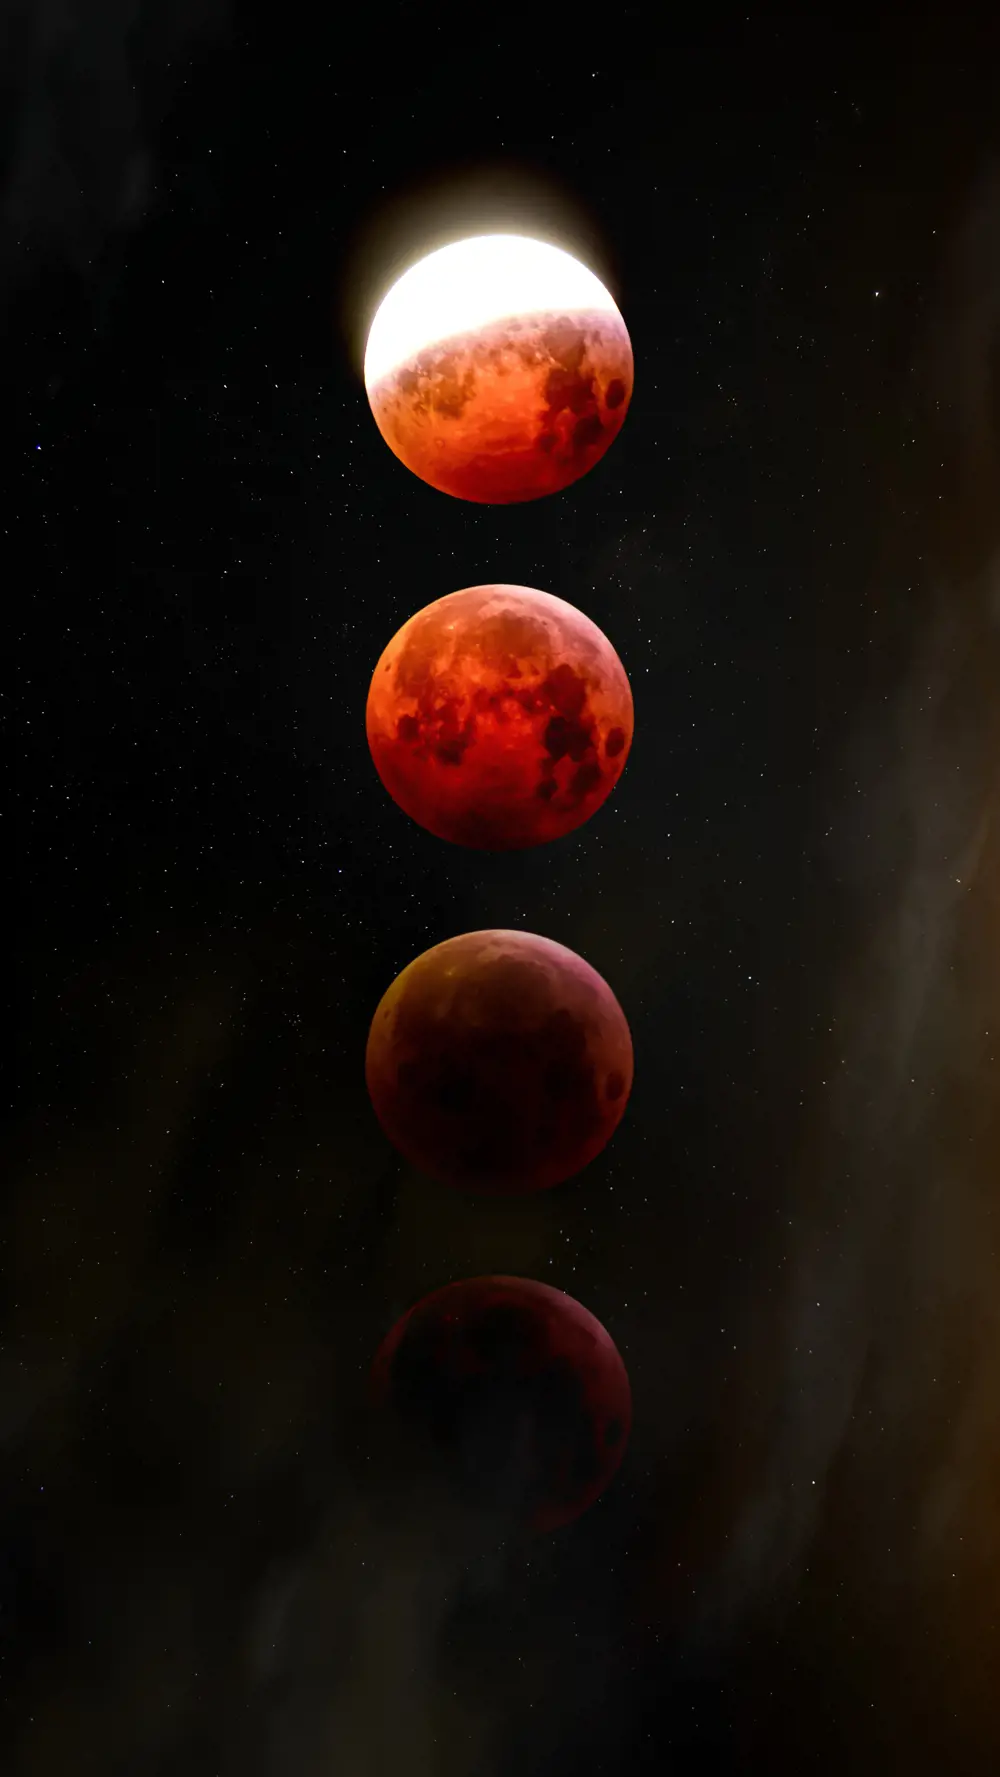 A time lapse image showing four Moons in the same photo frame, the top ones are coloured red and the bottom ones are slowly fading into the background.